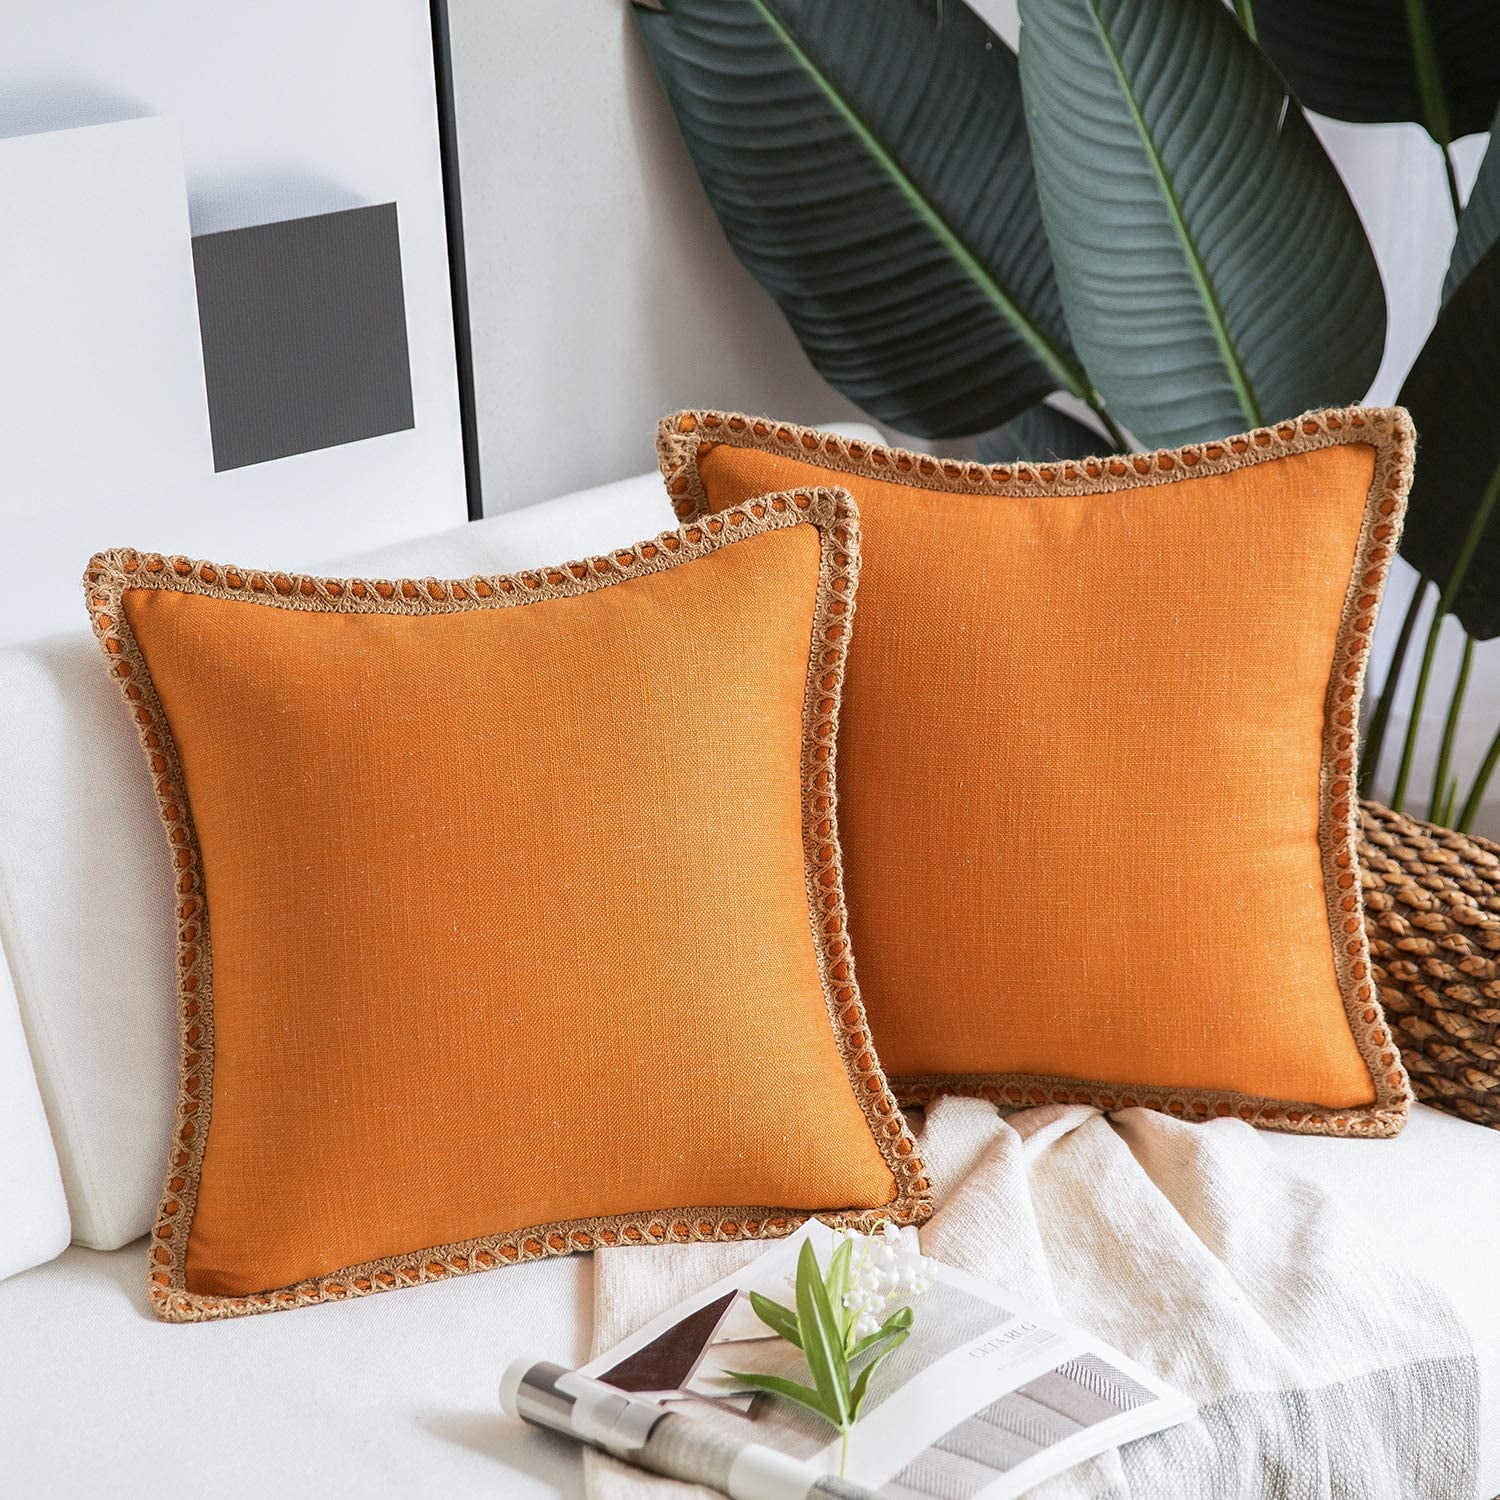 Caflife Throw Pillow Covers 12x20 for Boho Bed Couch, 2 Pack Elegant Home  Decorative Off White with Tassels Linen Burlap Throw Pillows for Farmhouse